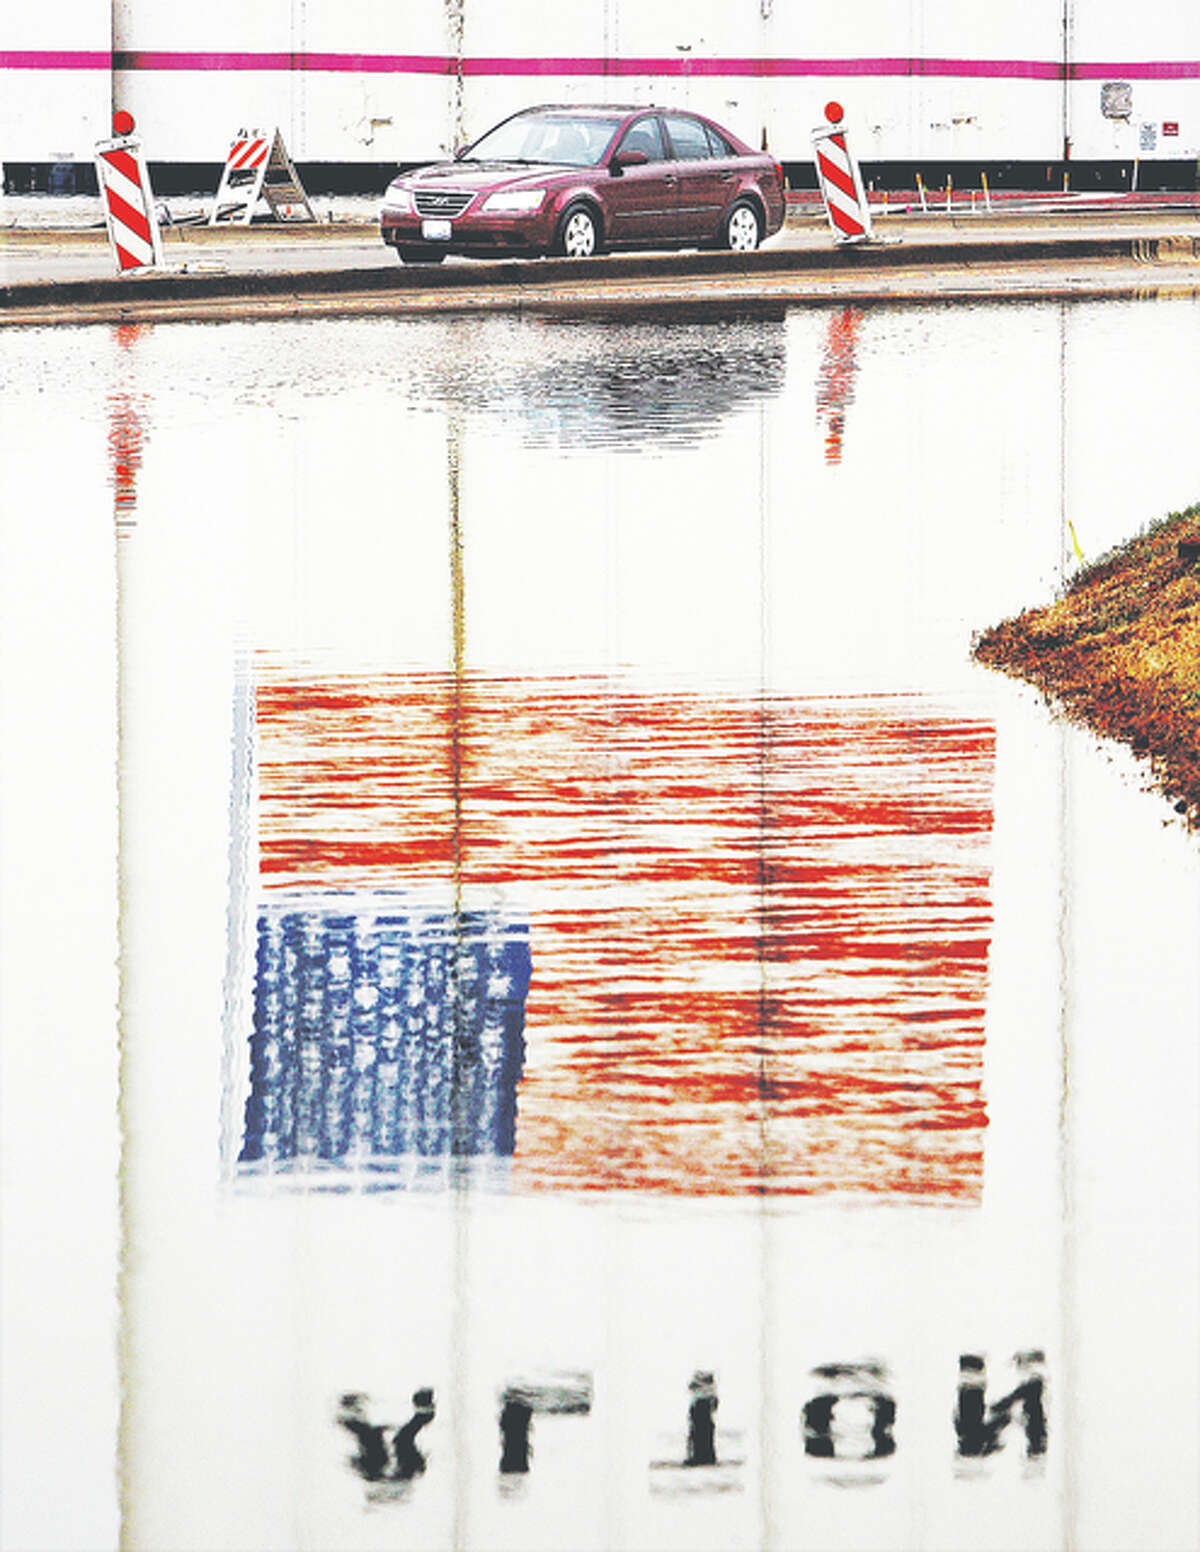 A motorist heads east on Landmarks Boulevard in downtown Alton in late December, past floodwaters covering the westbound lanes that were reflecting the large American flag painted on the Ardent Mills silos. The red line above the car is the flood level mark from the Great Flood of 1993.